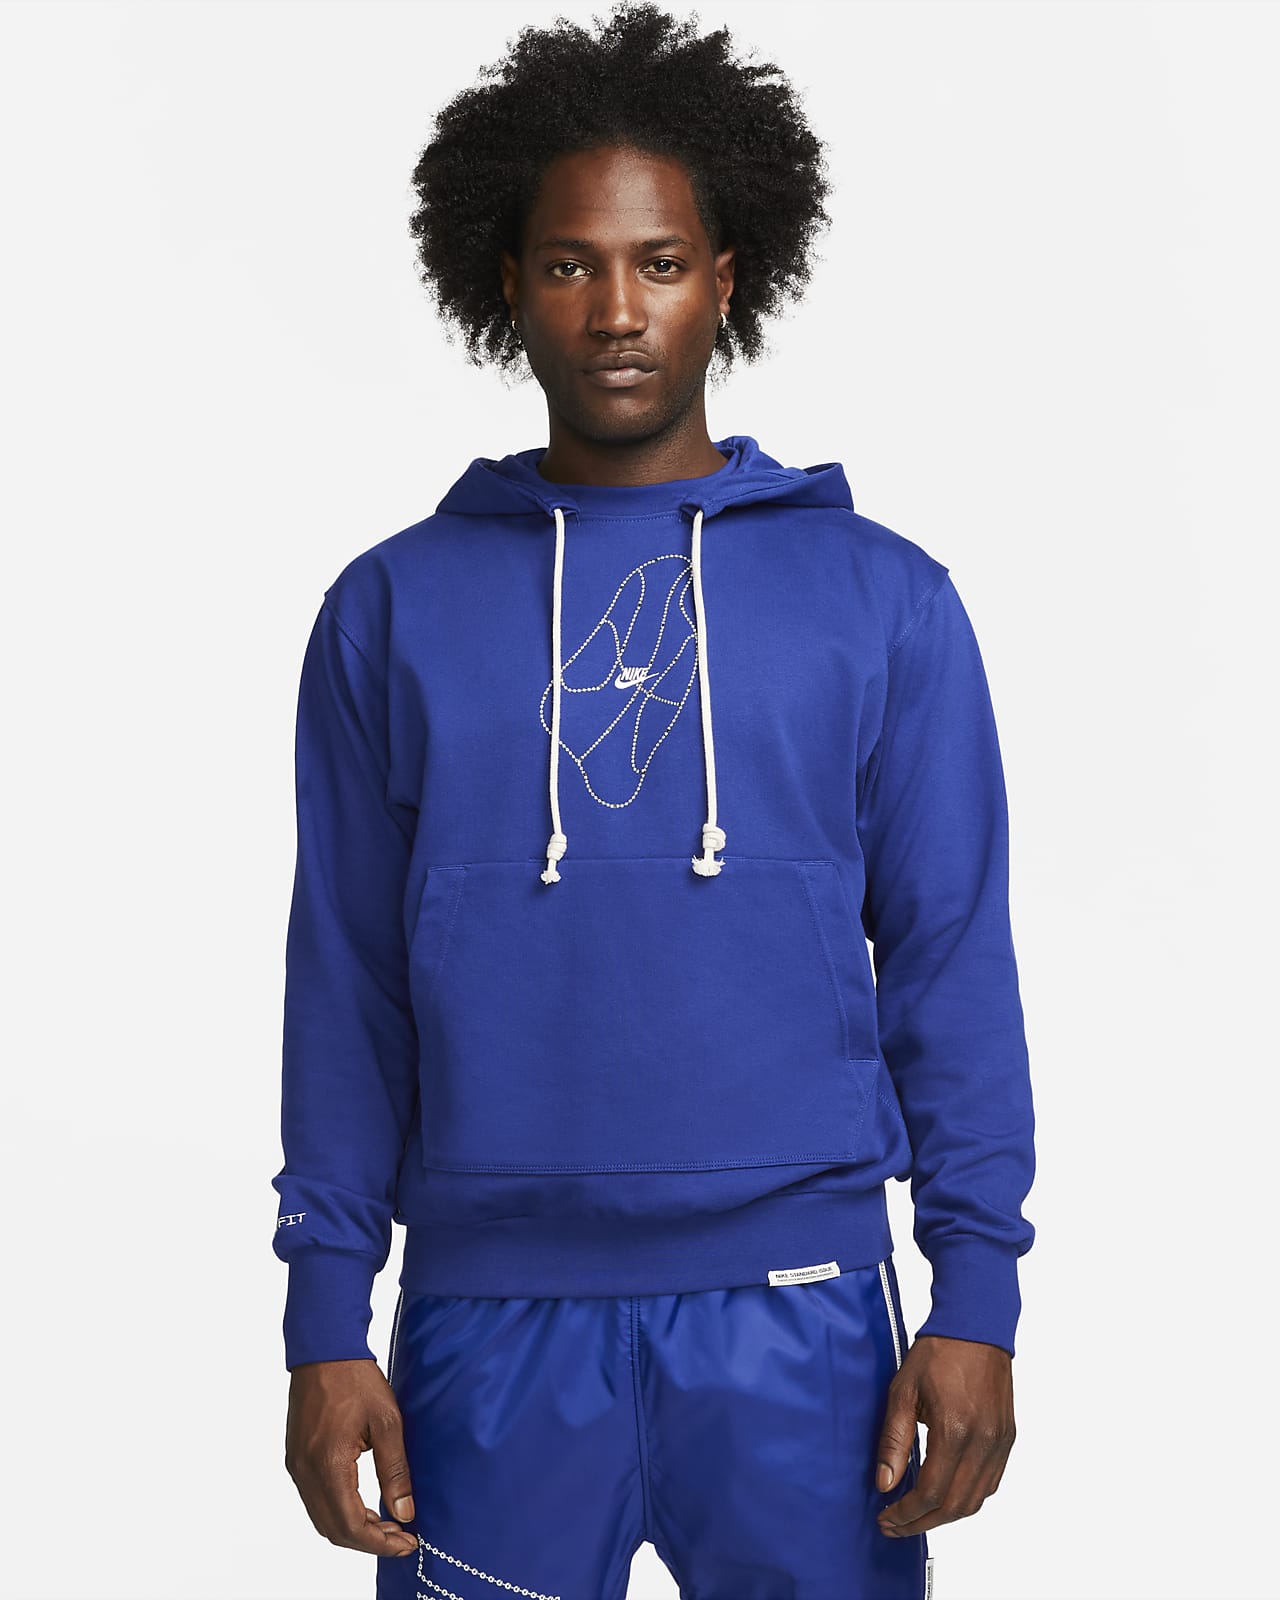 Nike Dri-FIT Standard Issue Men's Pullover Basketball Hoodie